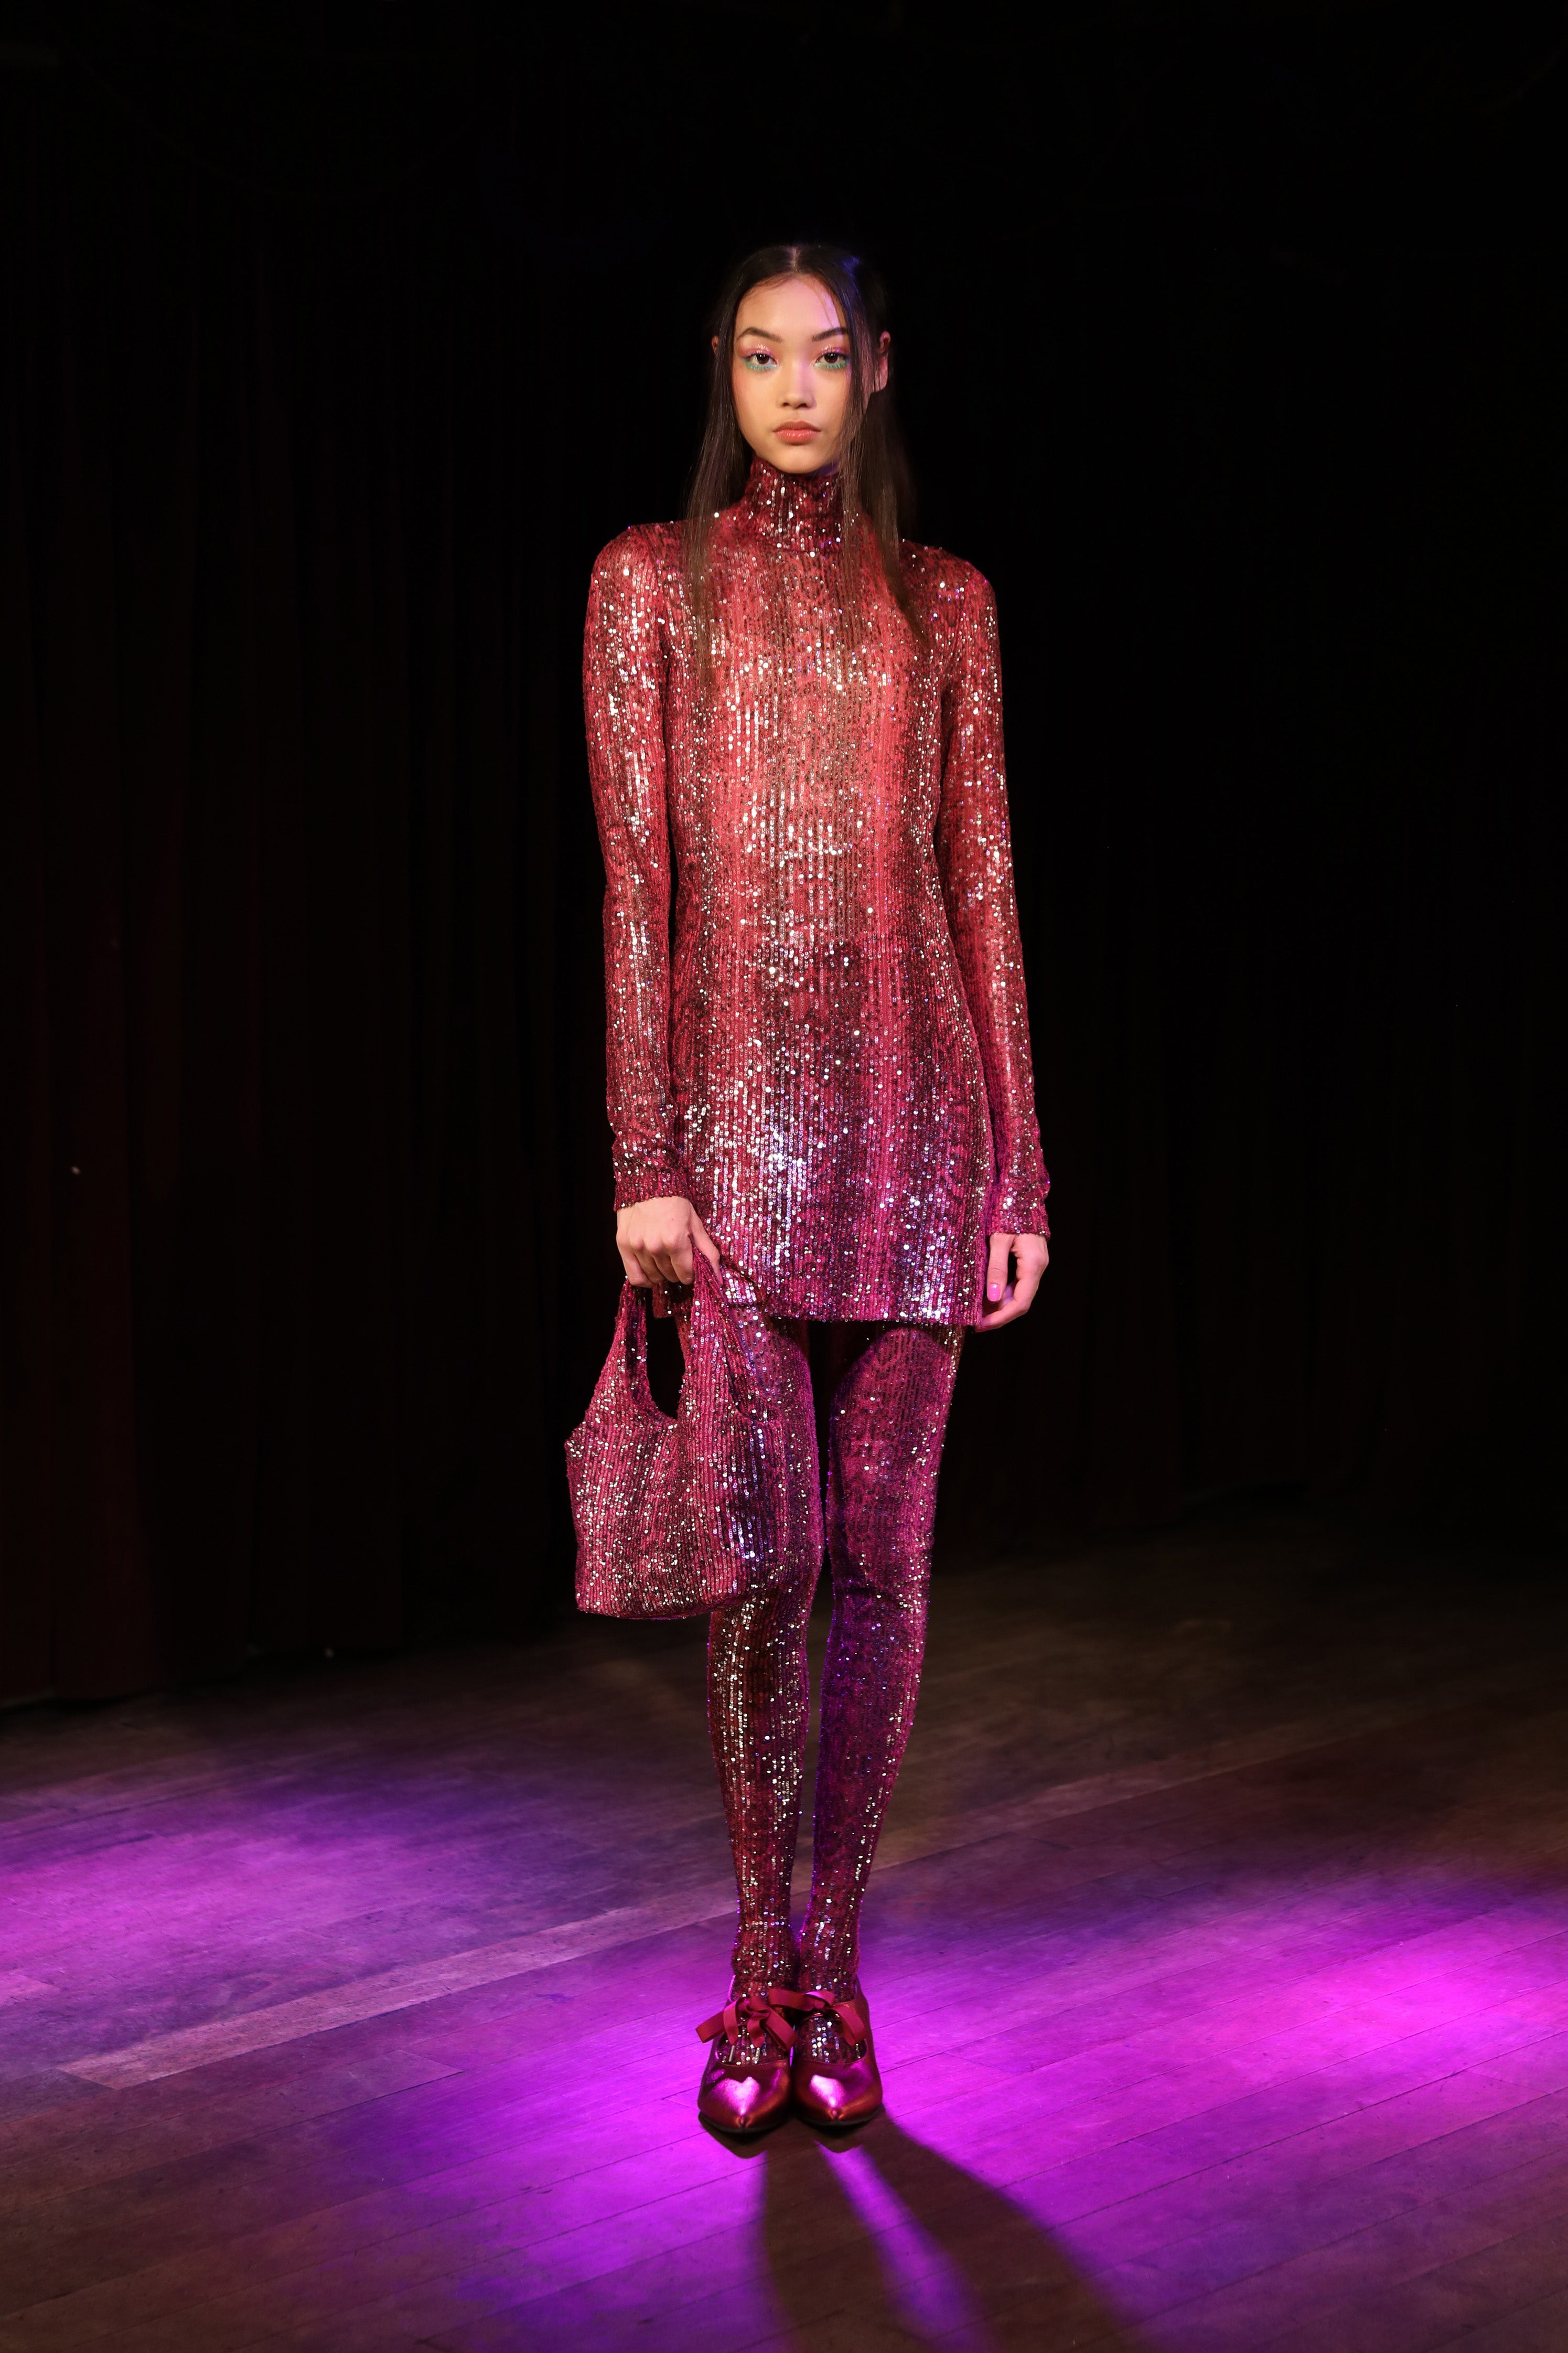 The Snakeskin Sequin Turtleneck Mini Dress, a true work of art that will make you the center of attention at events